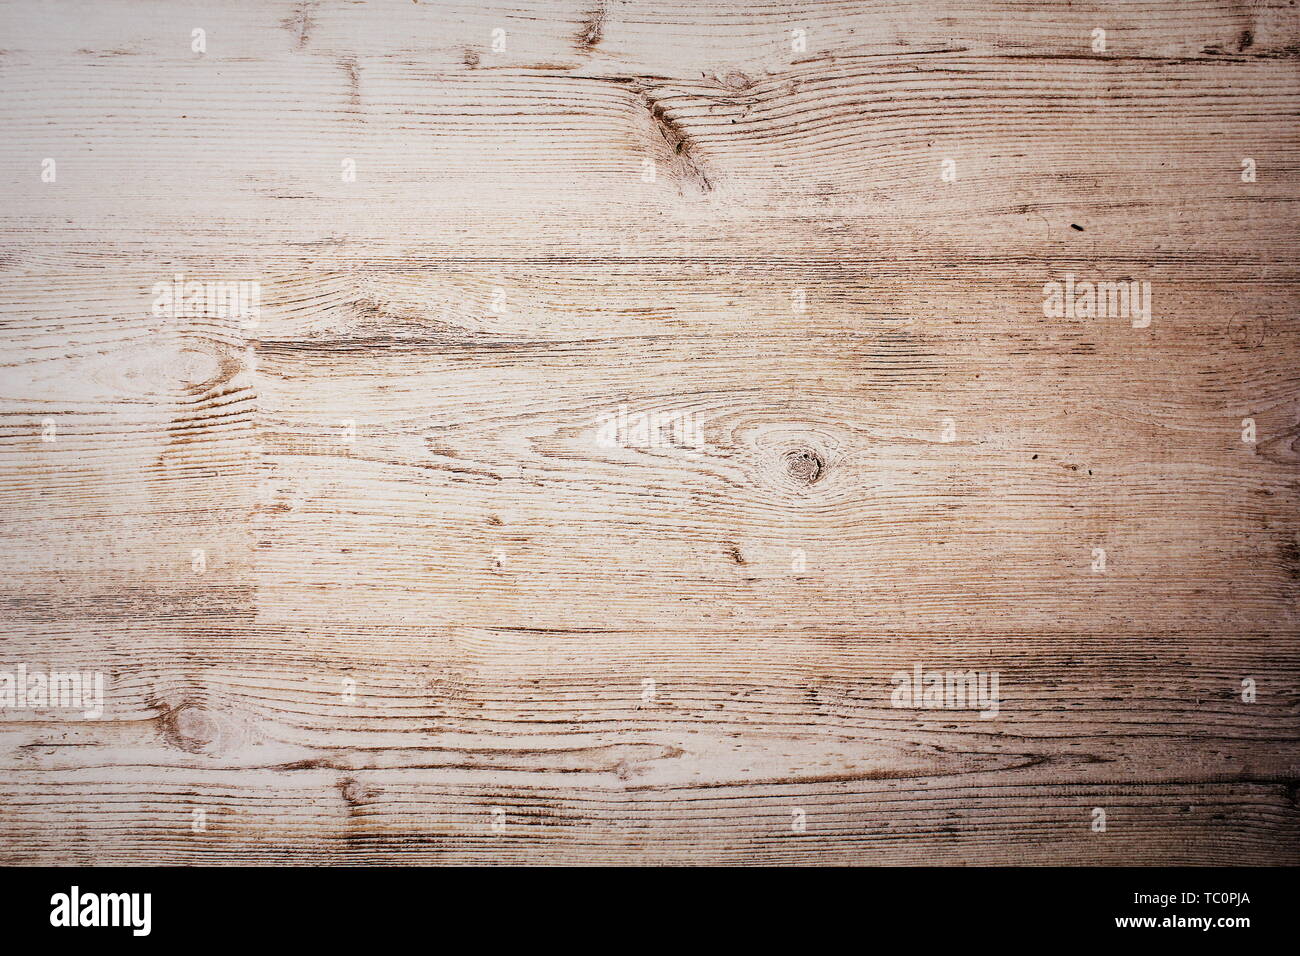 https://c8.alamy.com/comp/TC0PJA/old-white-rustic-wood-background-wooden-surface-with-copy-space-TC0PJA.jpg